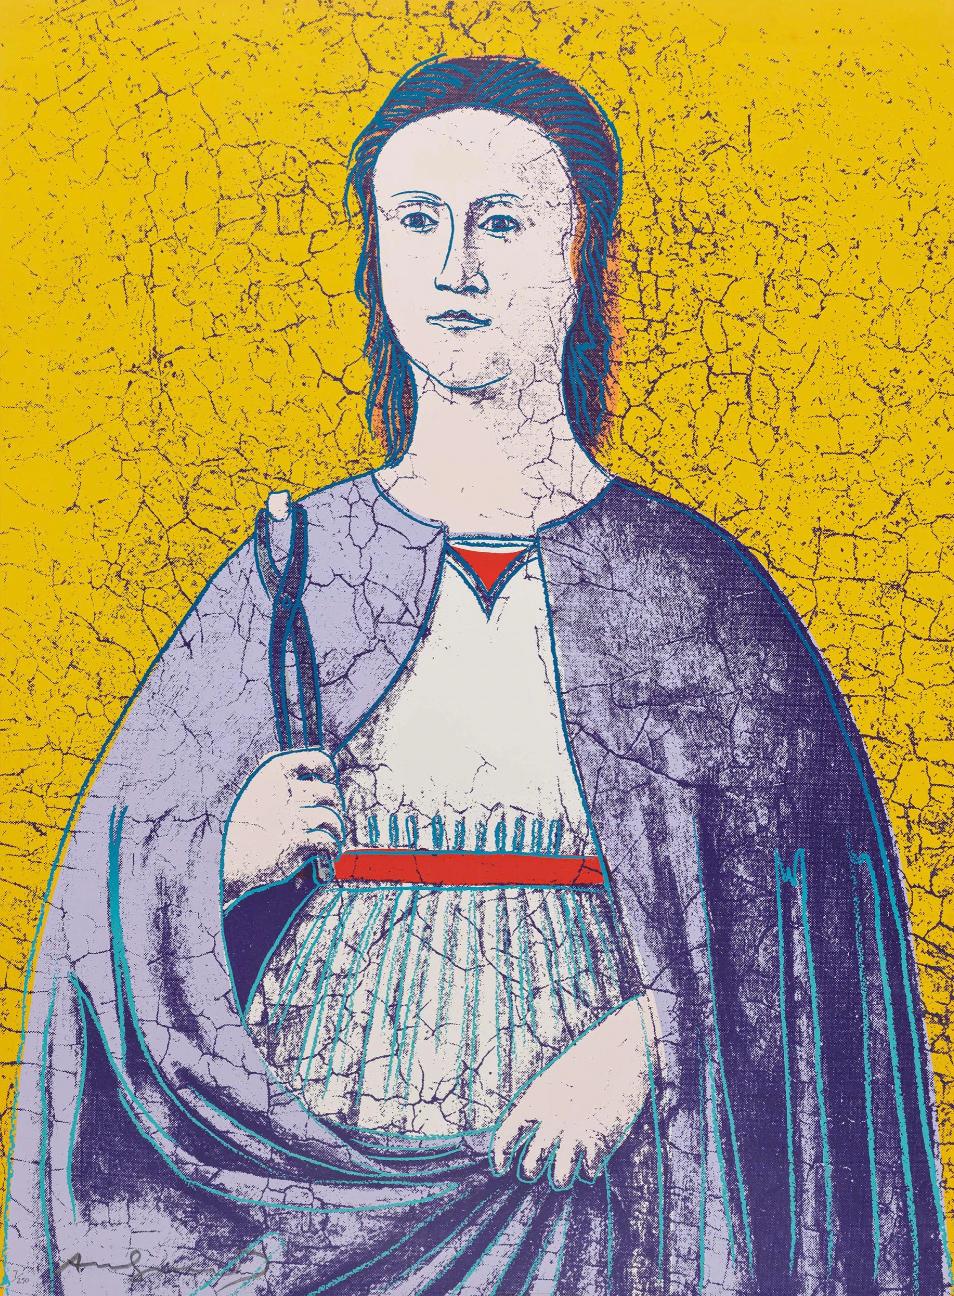 Artist: Andy Warhol 
Title: St. Apollonia FS II.330-333 (Matching Set)
Size:  30 x 22 Inches Each 
Medium: Screenprint 
Edition: 7/250
Year: 1984
Notes: Hand-signed and Numbered by the artist.